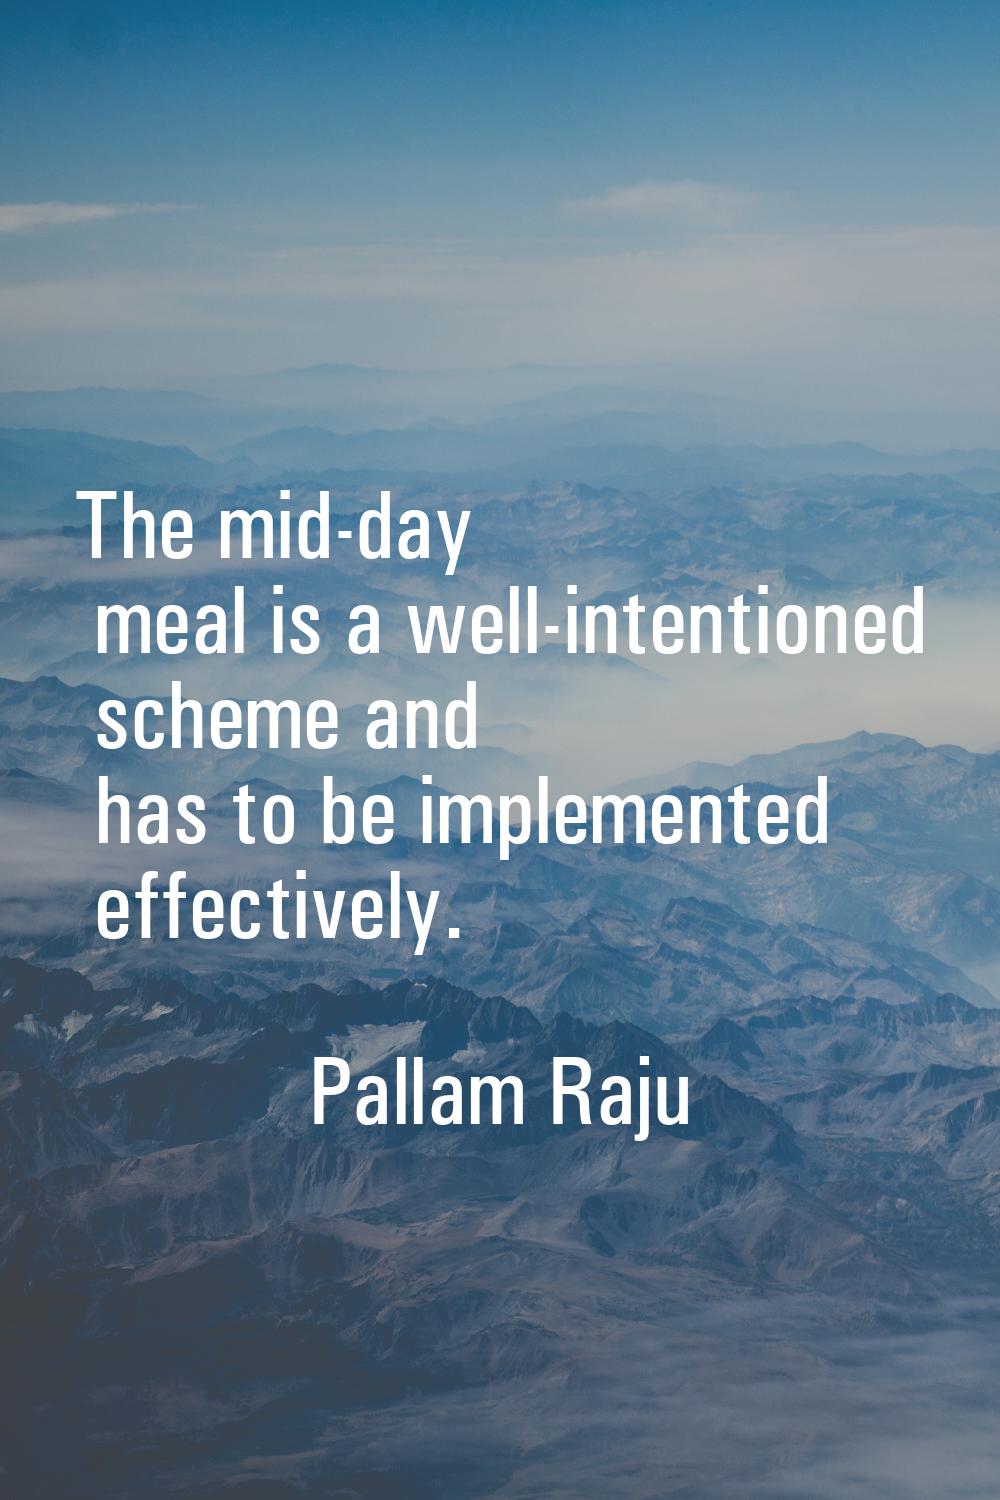 The mid-day meal is a well-intentioned scheme and has to be implemented effectively.